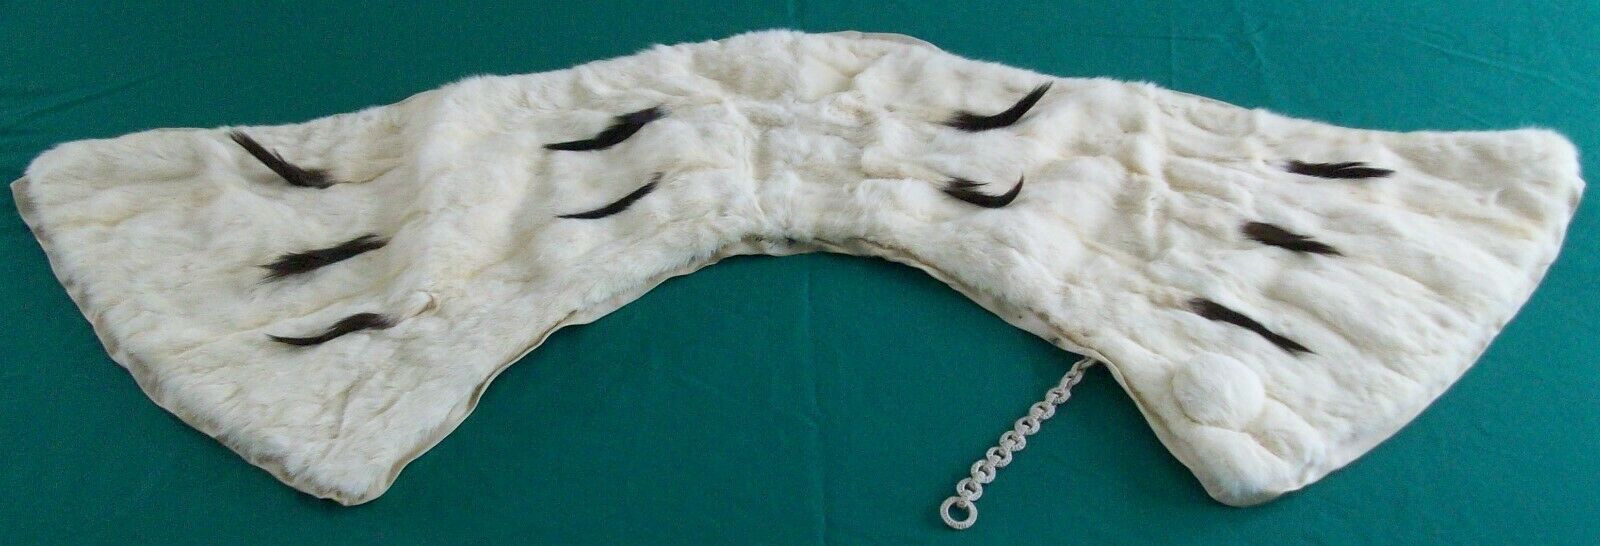 Vintage Ca 1940 Ermine Stole With Flared Shoulders Edward F. Kakas & Sons Boston